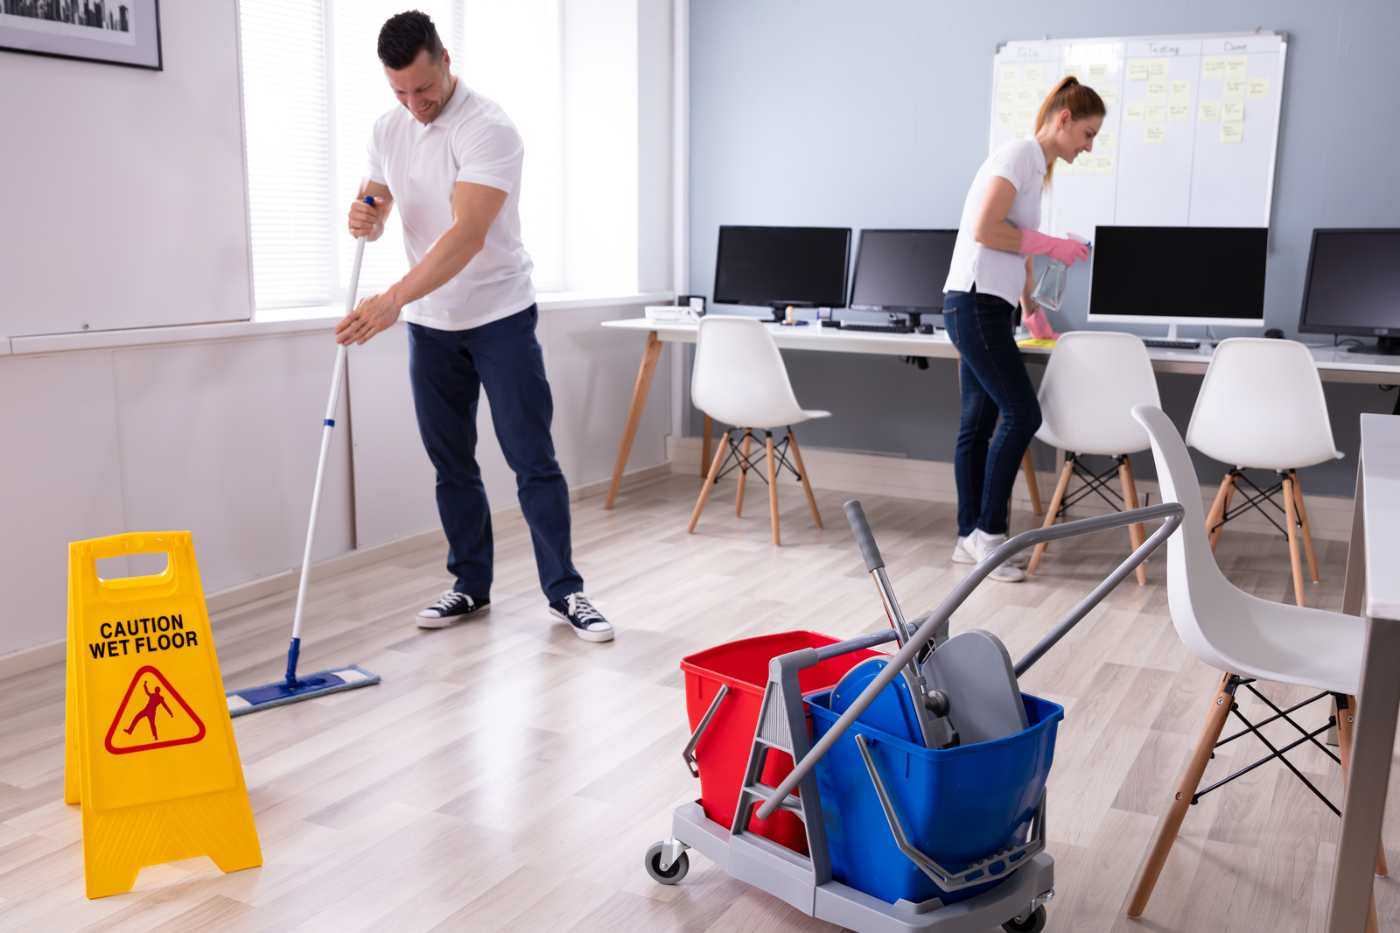 Two Janitors Cleaning A Desk And Mopping The Floor Of An Office